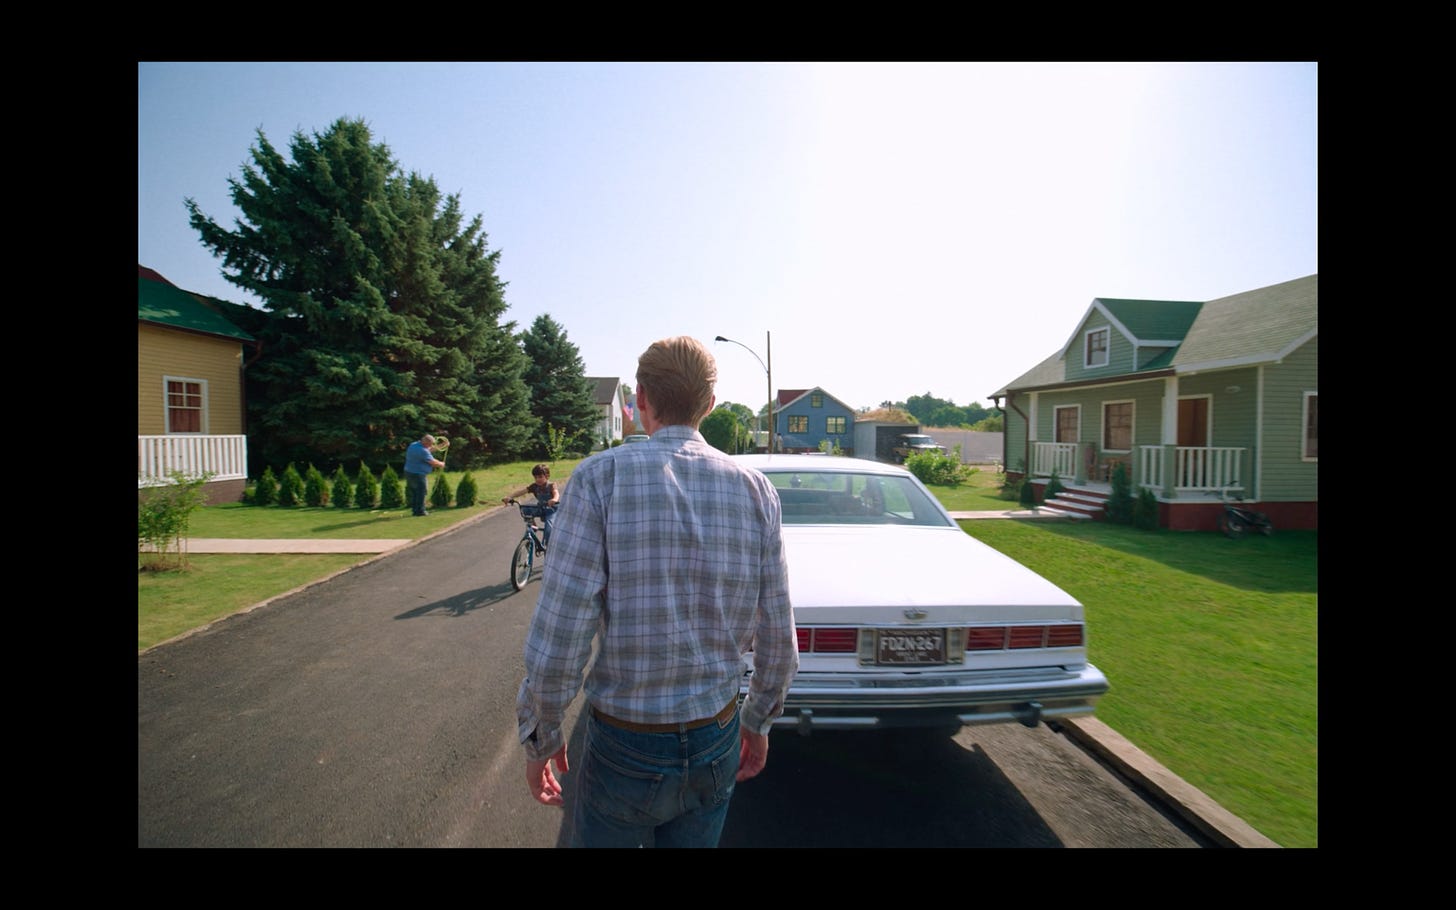 A picture of Frank, the film's secondary antagonist, walking down an idyllic suburban street in the 1980s